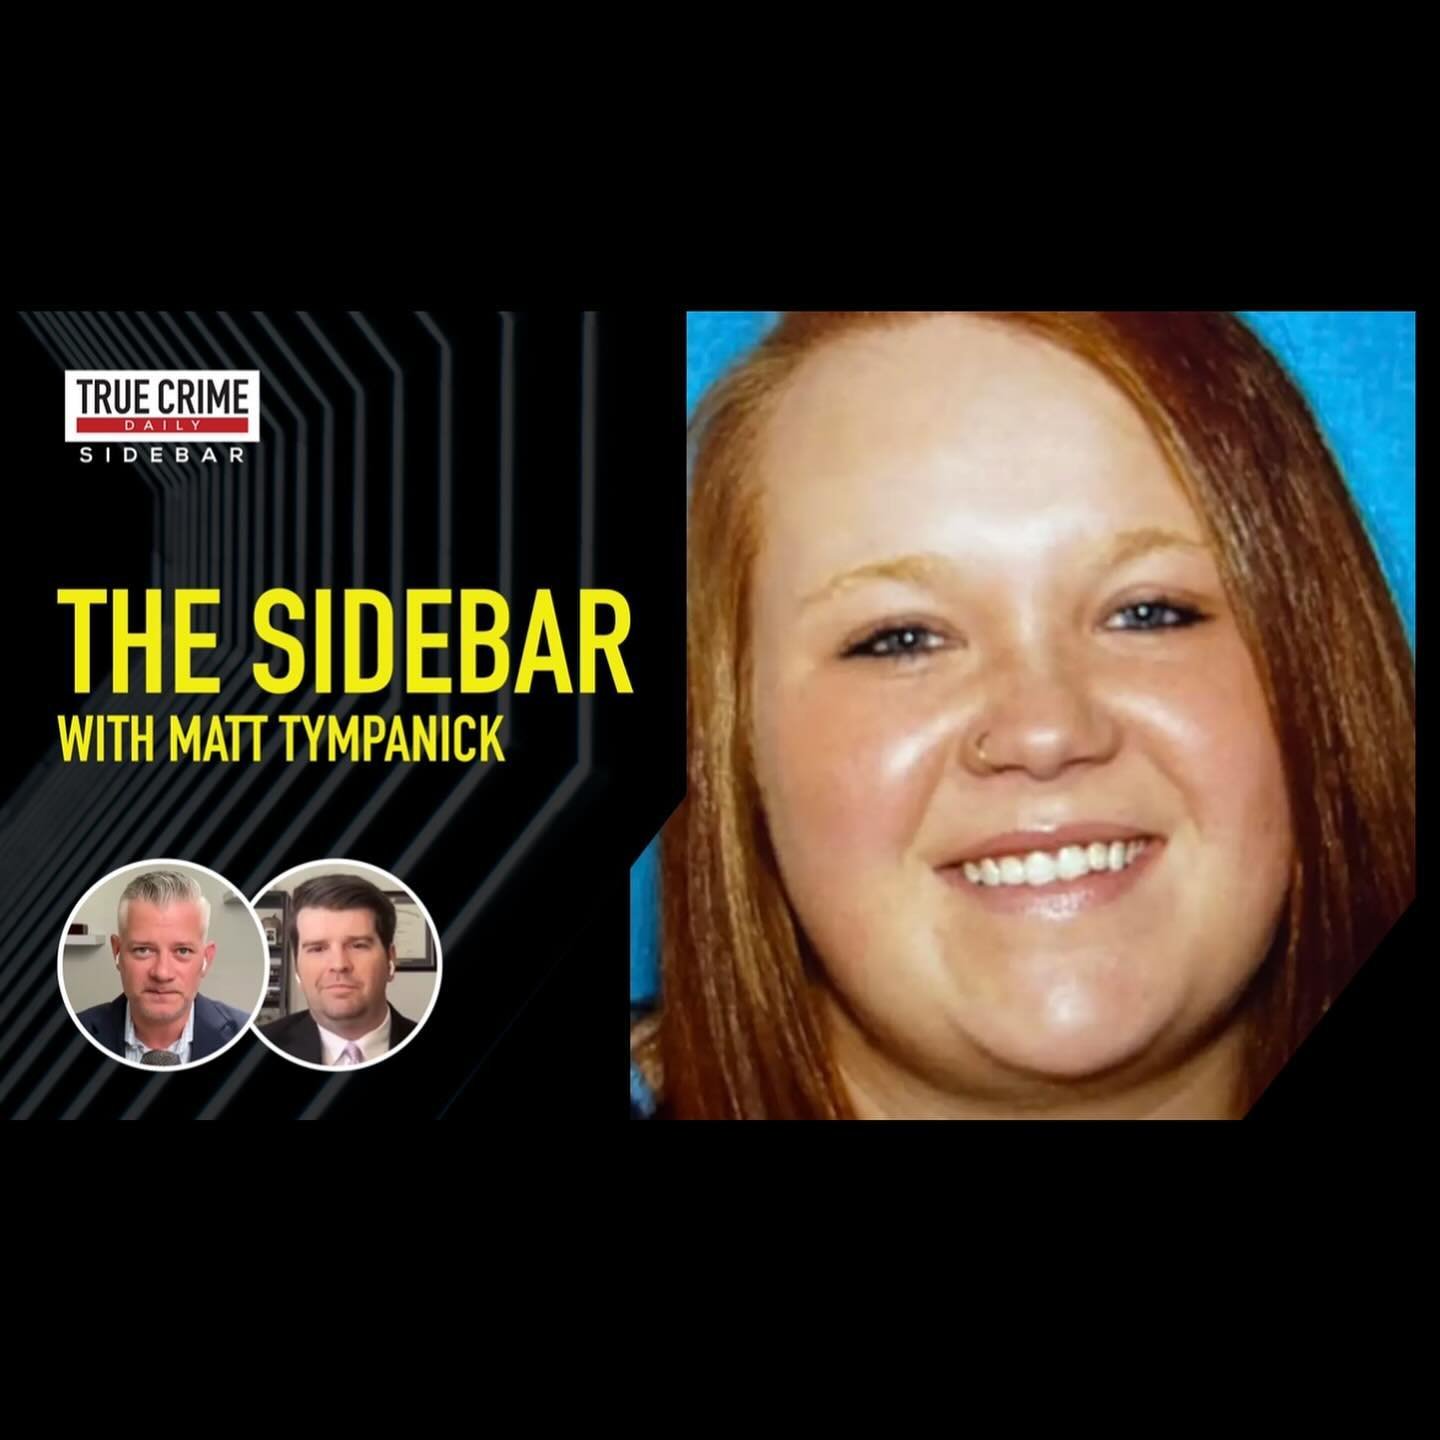 Check out this week&rsquo;s episode of @crimewatchdaily #Sidebar with guest Matt Tympanick of @tympanicklaw! Together we discuss the killing of two mothers allegedly perpetrated by members of an anti-government group, sentencing for the armorer of th